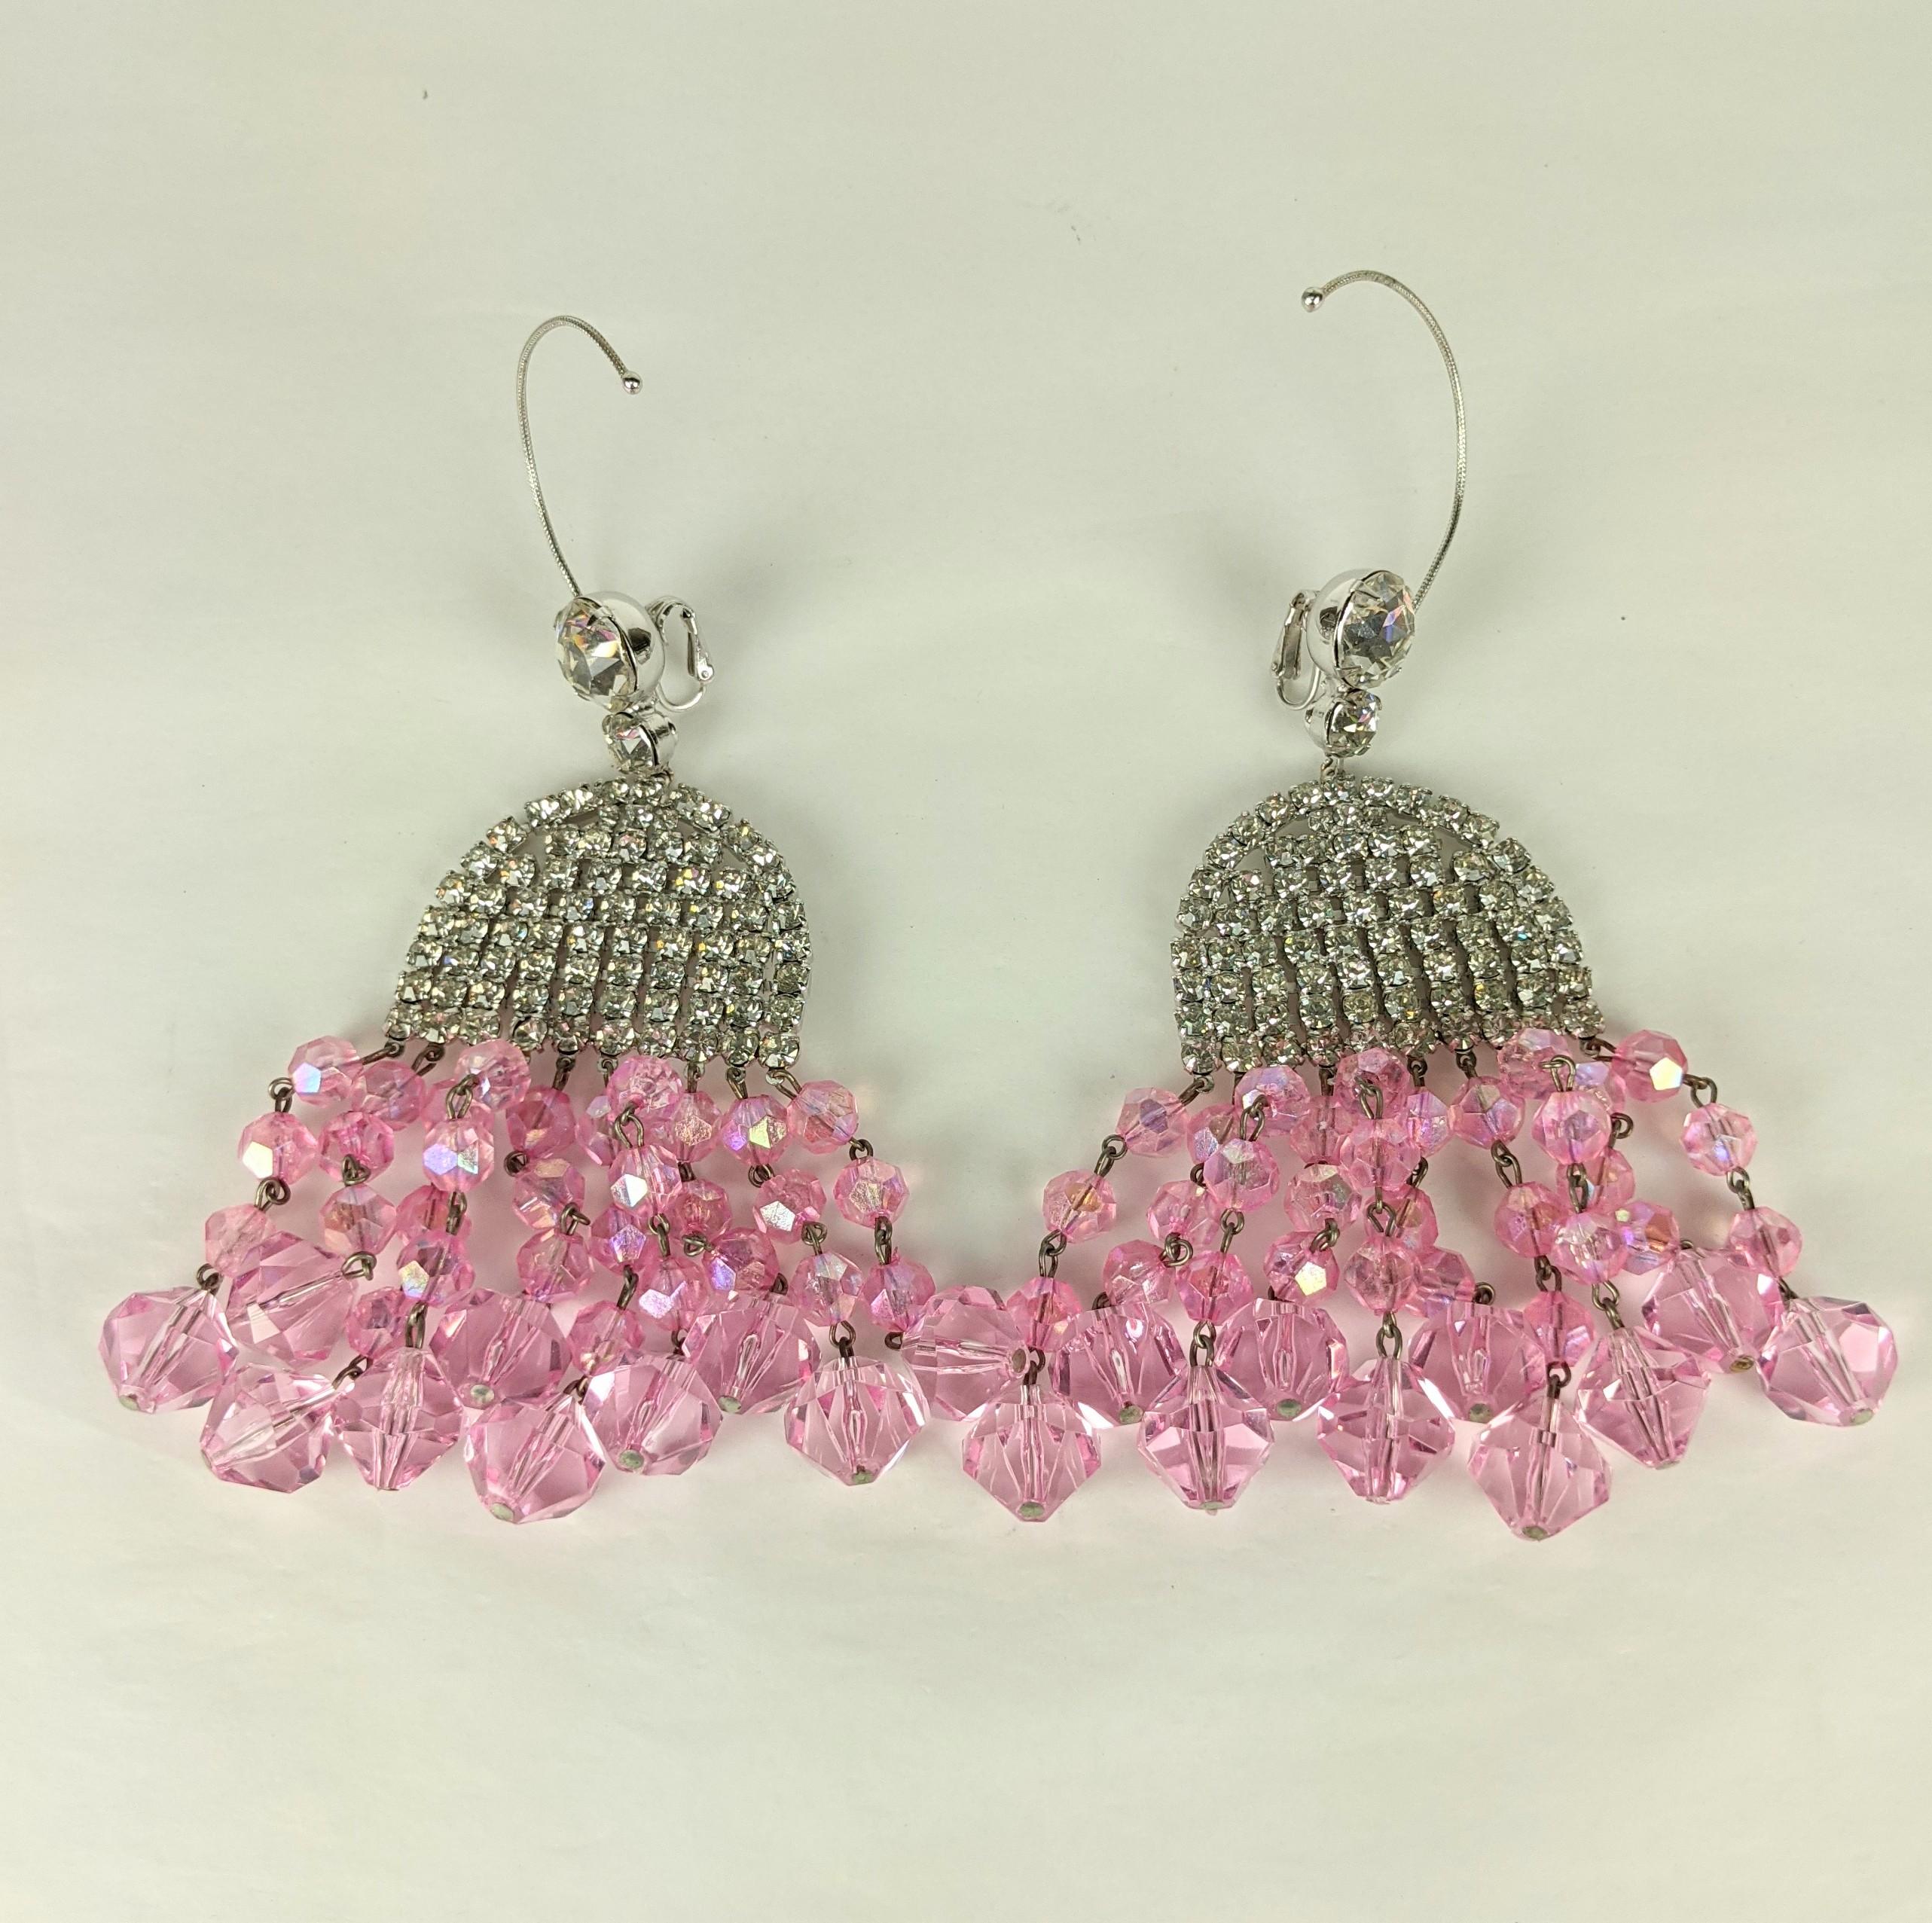 Rare and collectible Mimi di Nardo Massive 1960's Crystal and Pink Aurora Earrings with clip back fittings and ear hoops for support.  A large crystal decorates the ear with a pave half moon pendant with strands of graduated aurora borealis pink